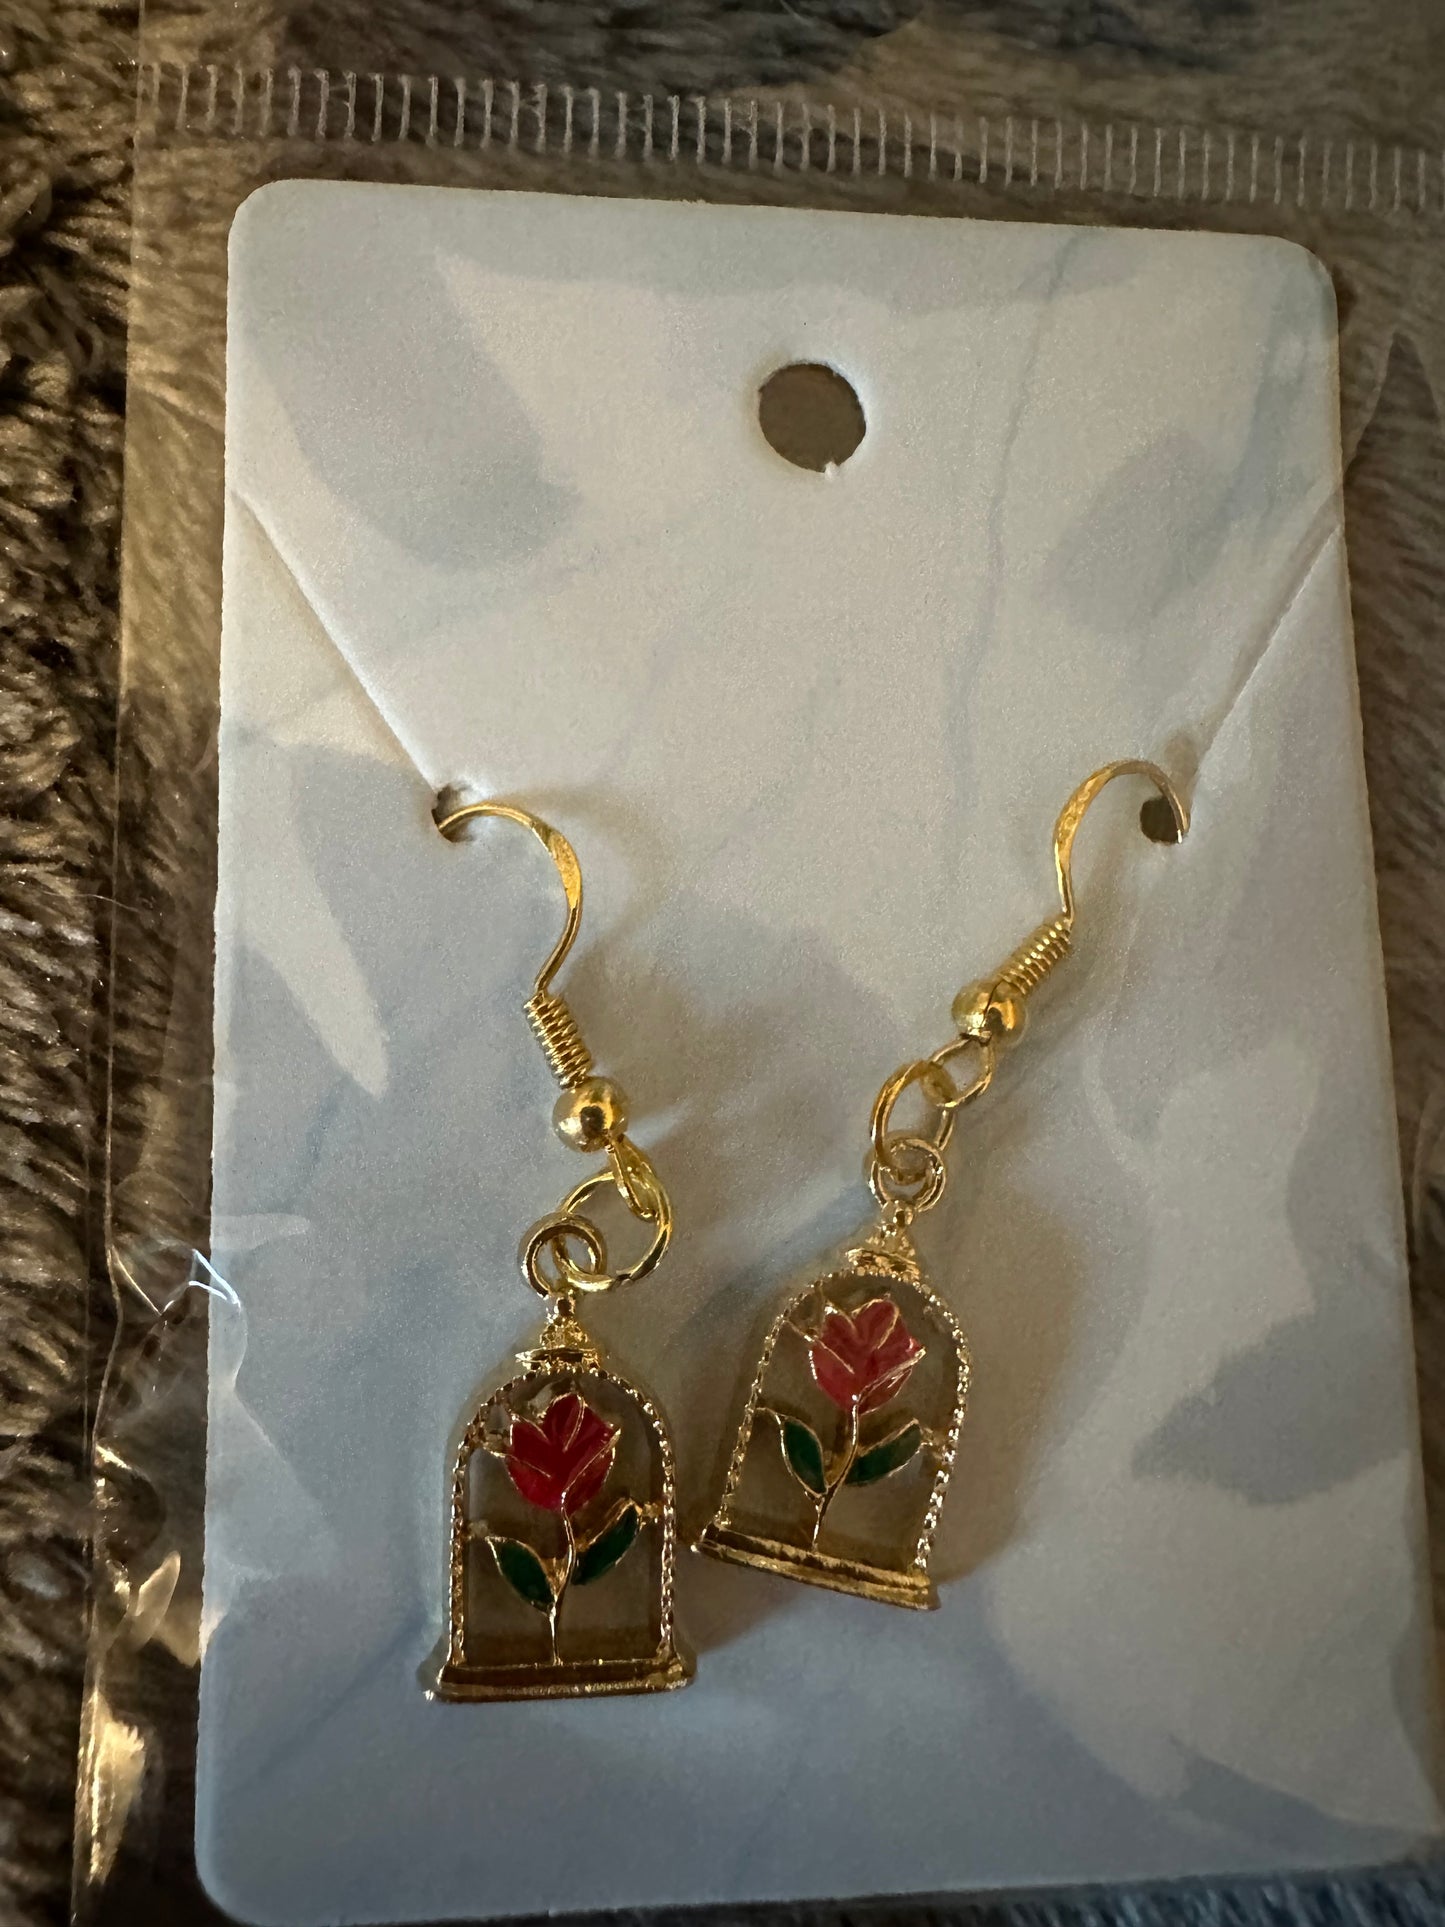 Beauty and the beast rose earrings